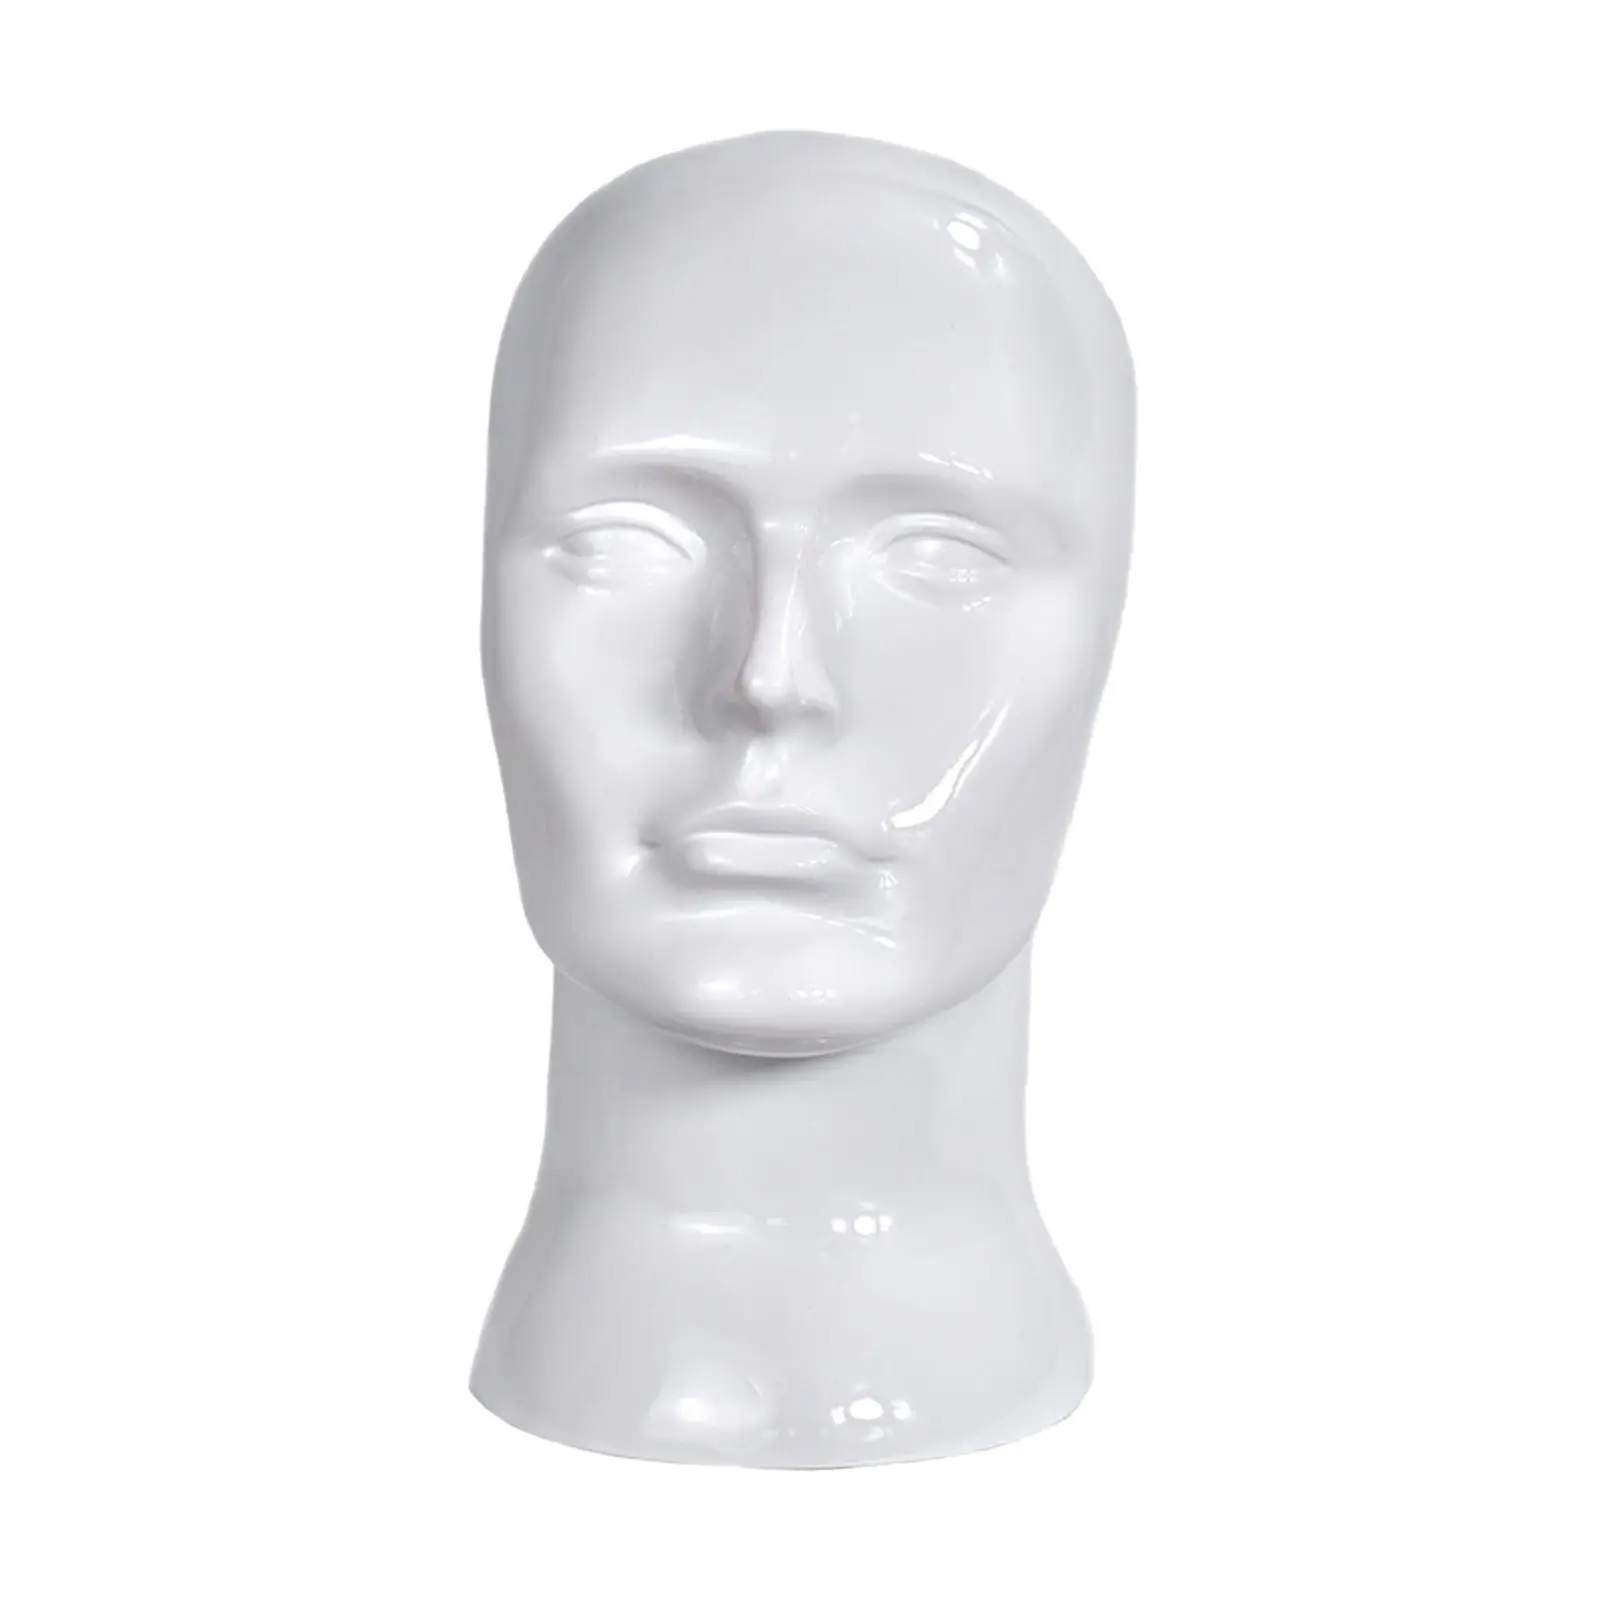 Mannequin Head Sturdy Display Holder for Shopping Mall Display Jewellery